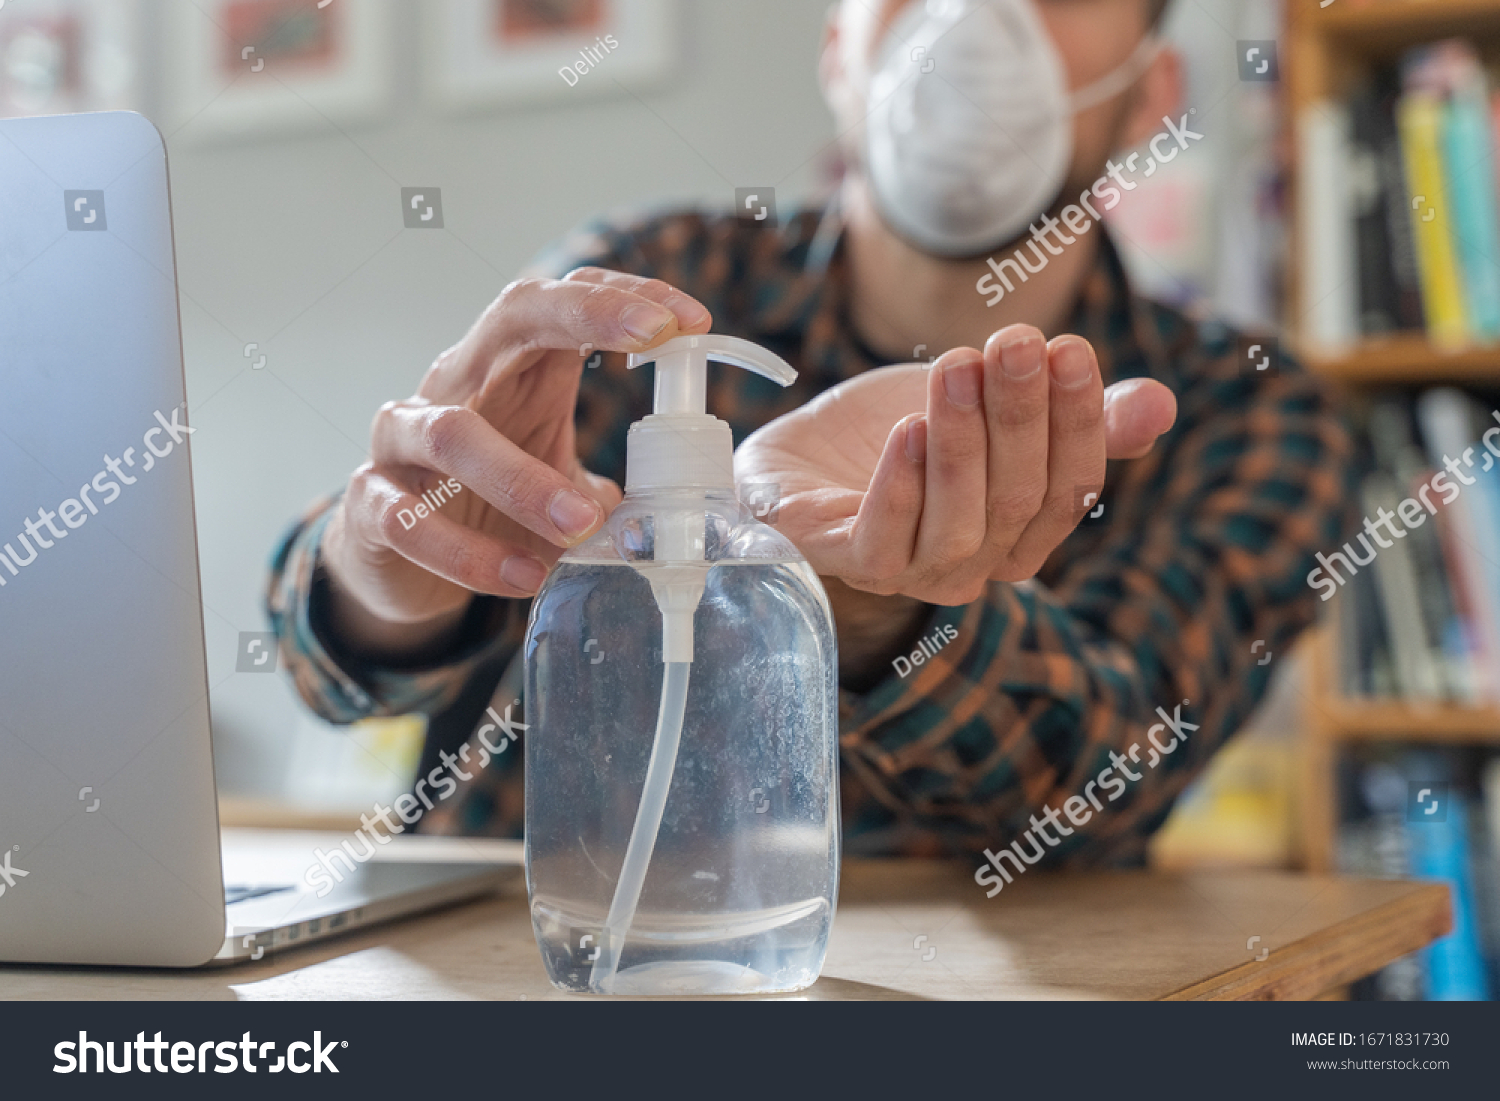 Coronavirus. Man working from home wearing protective mask. quarantine for coronavirus wearing protective mask. Working from home. Cleaning her hands with sanitizer gel.  Thermometer fever inspection. #1671831730